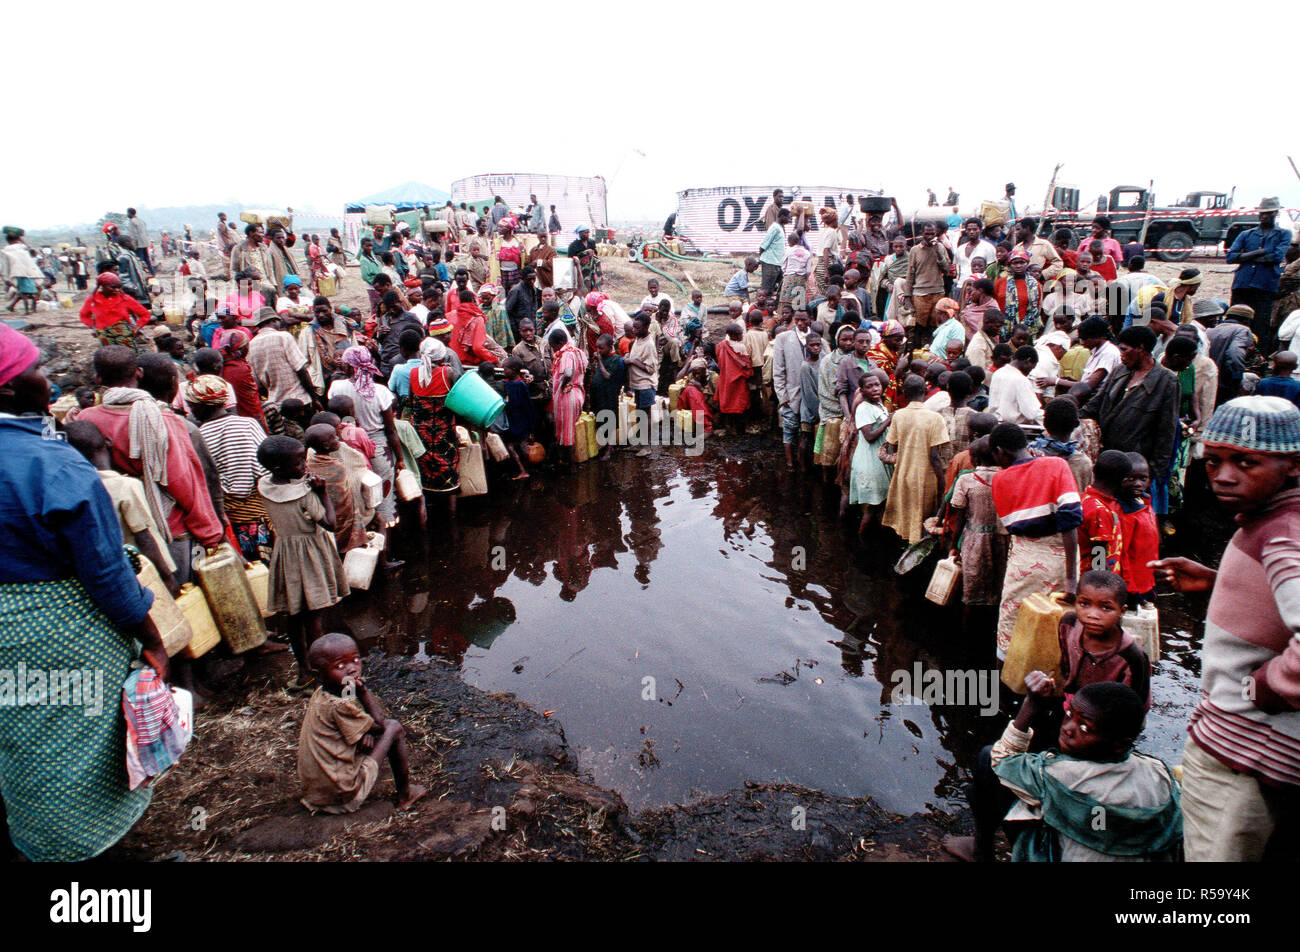 1994 Zaire- Refugees from Rwanda's bitter civil war between the Hutus and Tutsis tribes in Southern Africa, gather with anything that will hold water, to get much needed food and water, supplied by US military relief efforts. Stock Photo